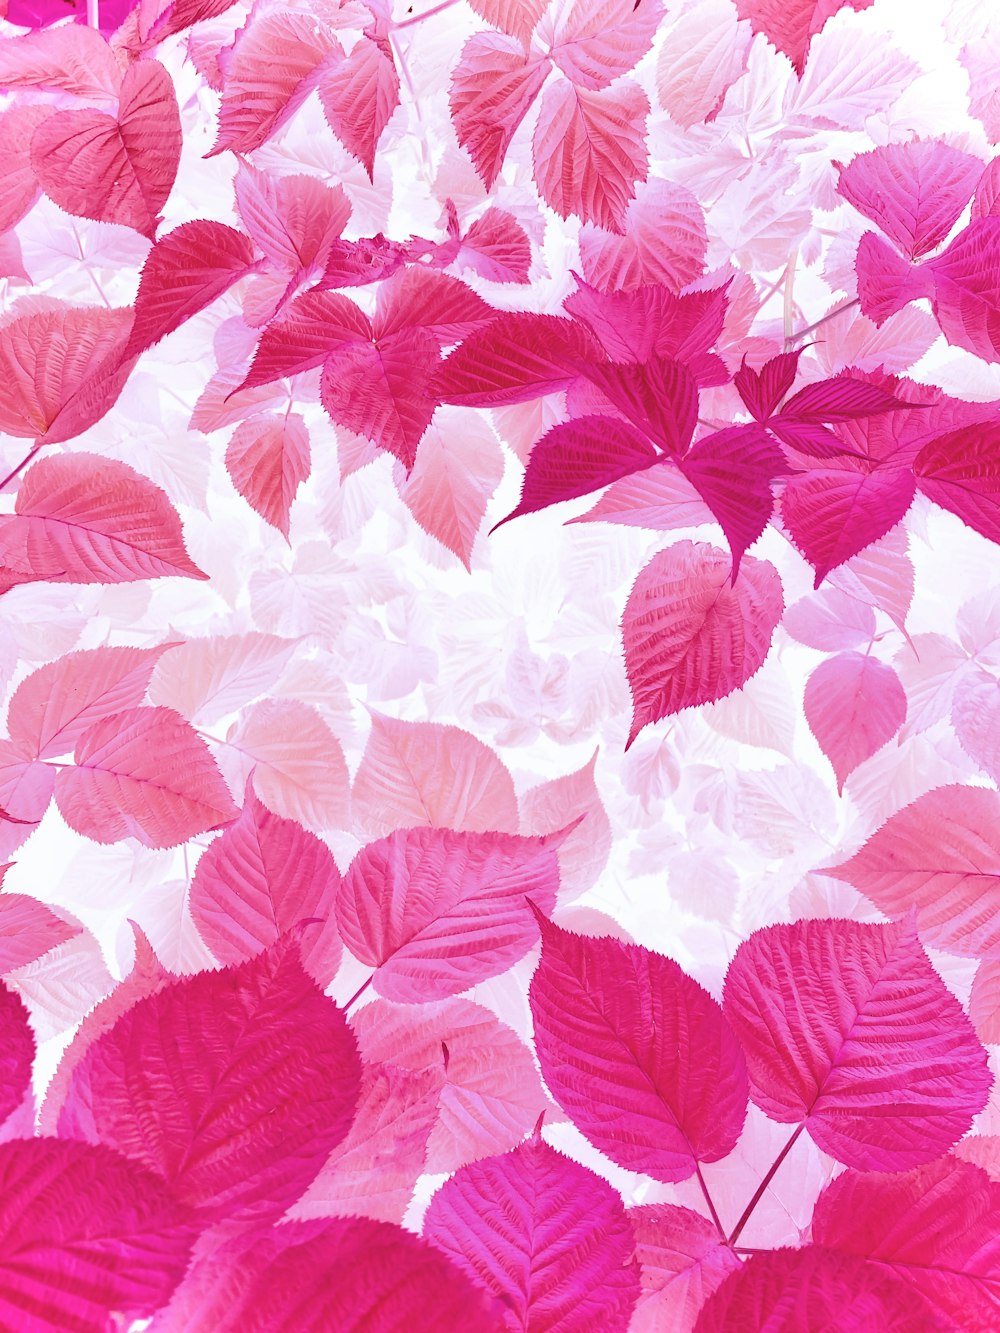 a group of pink and white leaves floating in the air